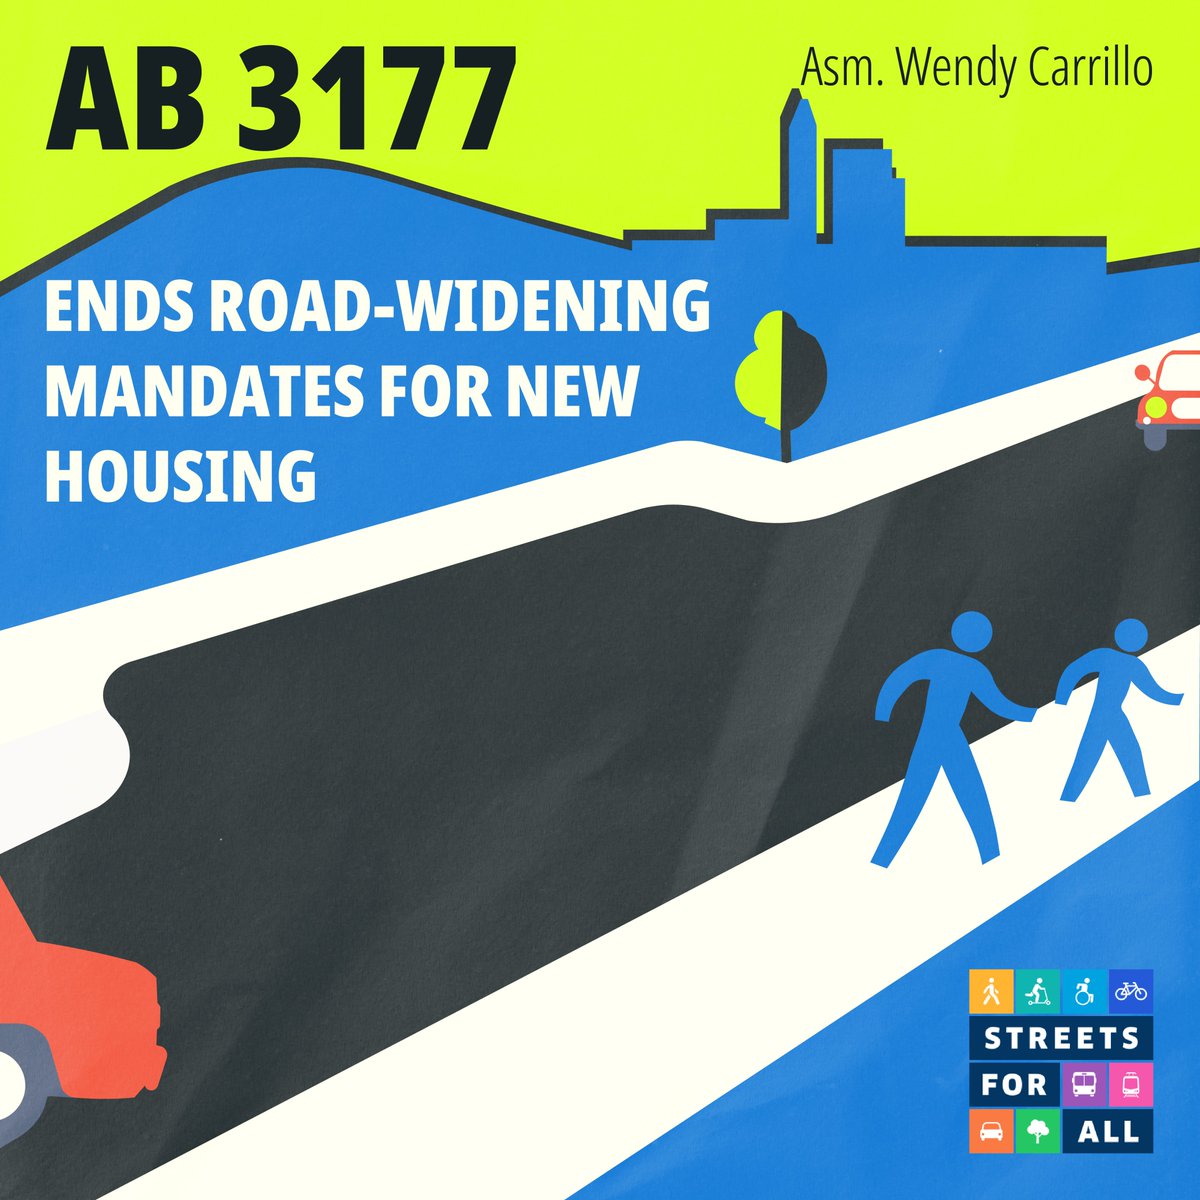 ✅ PASSED COMMITTEE: Legislation (AB 3177) to keep cities from making builders of new homes spend 💰 — and give up land needed for 🏡 — to add lanes to streets. Kudos to @AsmCarrillo for championing this effort to make housing cheaper, faster & more plentiful.